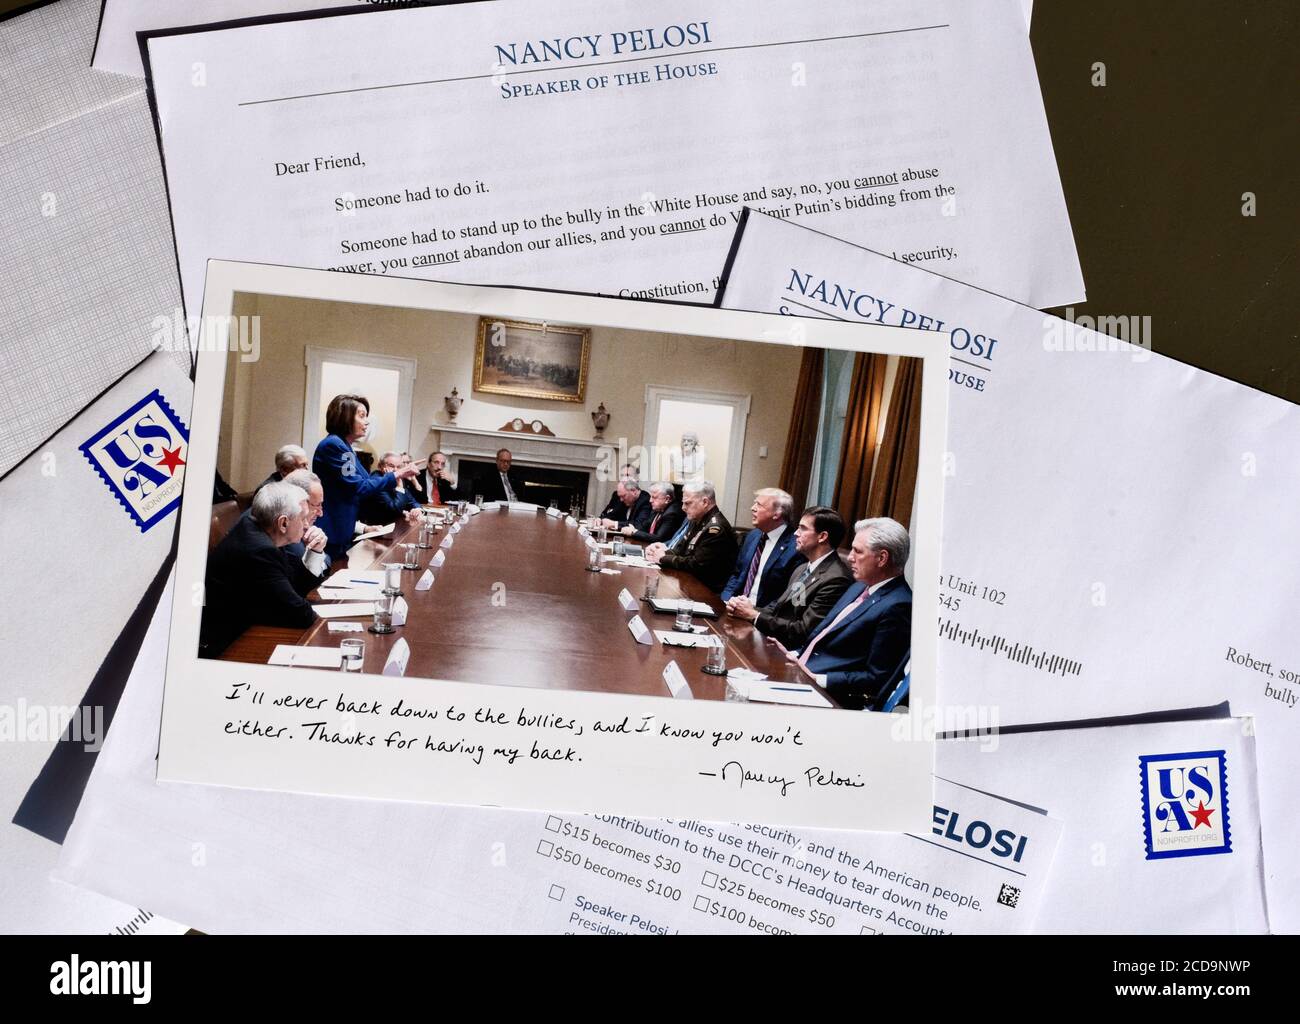 A request for contributions sent to Democrats by Speaker of the House Nancy Pelosi and the DCCC with a photograph of her challenging President Trump. Stock Photo